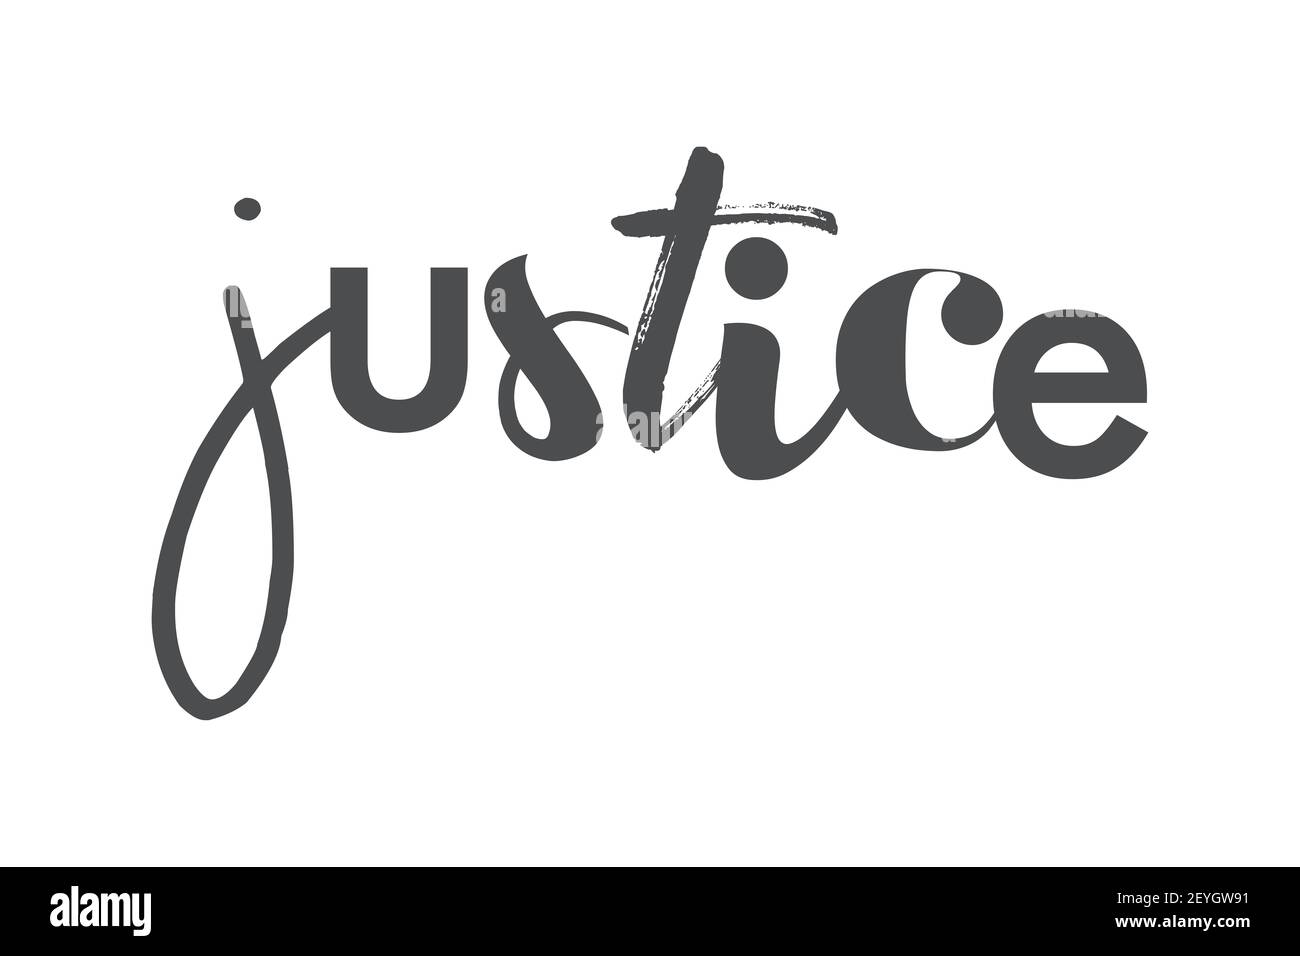 Modern, playful, bold graphic design of a saying Justice in grey